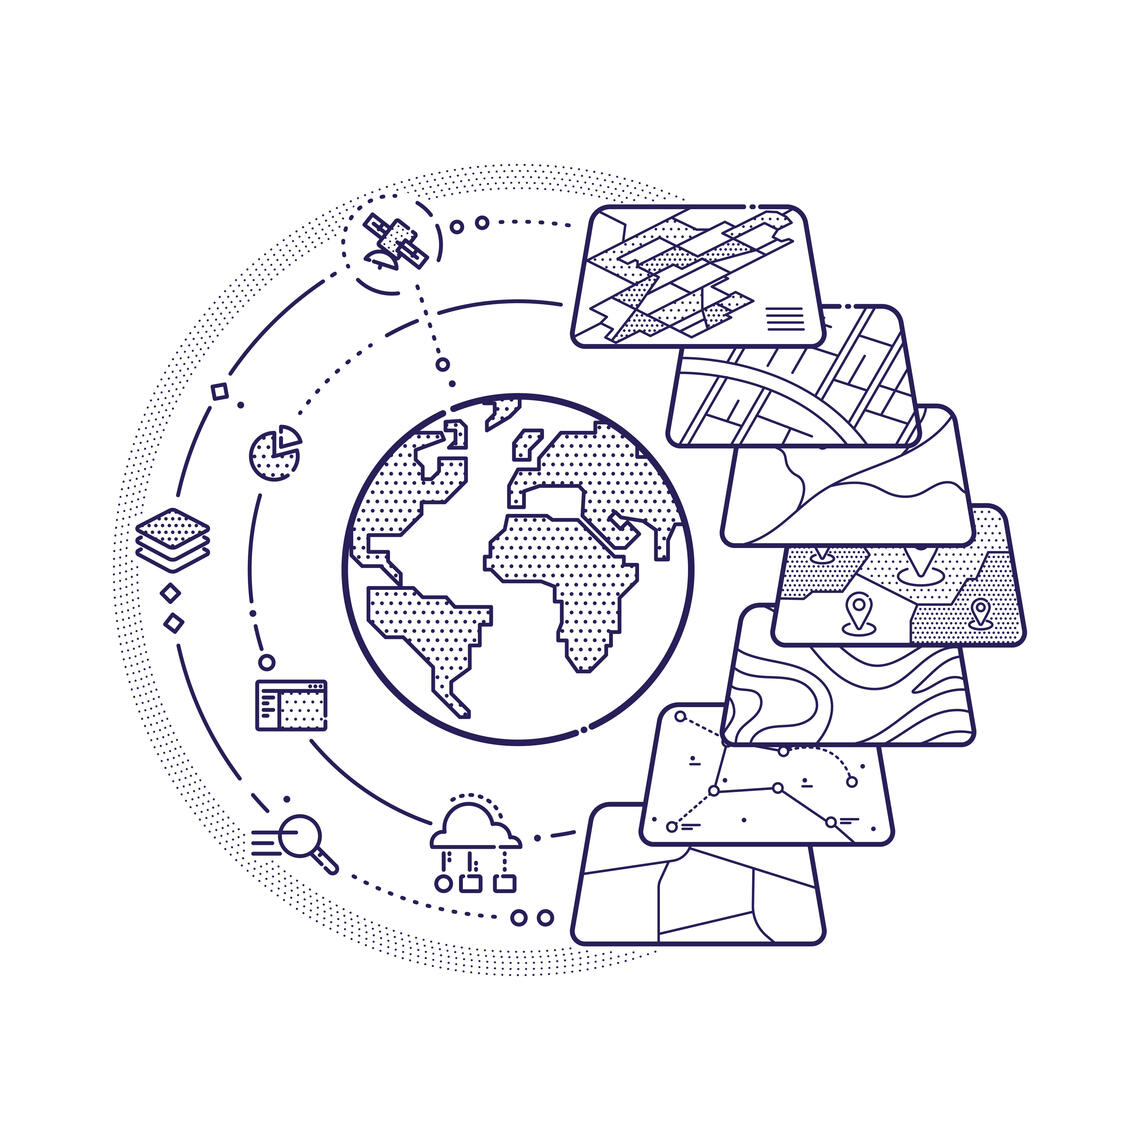 An illustration that graphically depicts aspects of geographic information science. Adobe Stock image.